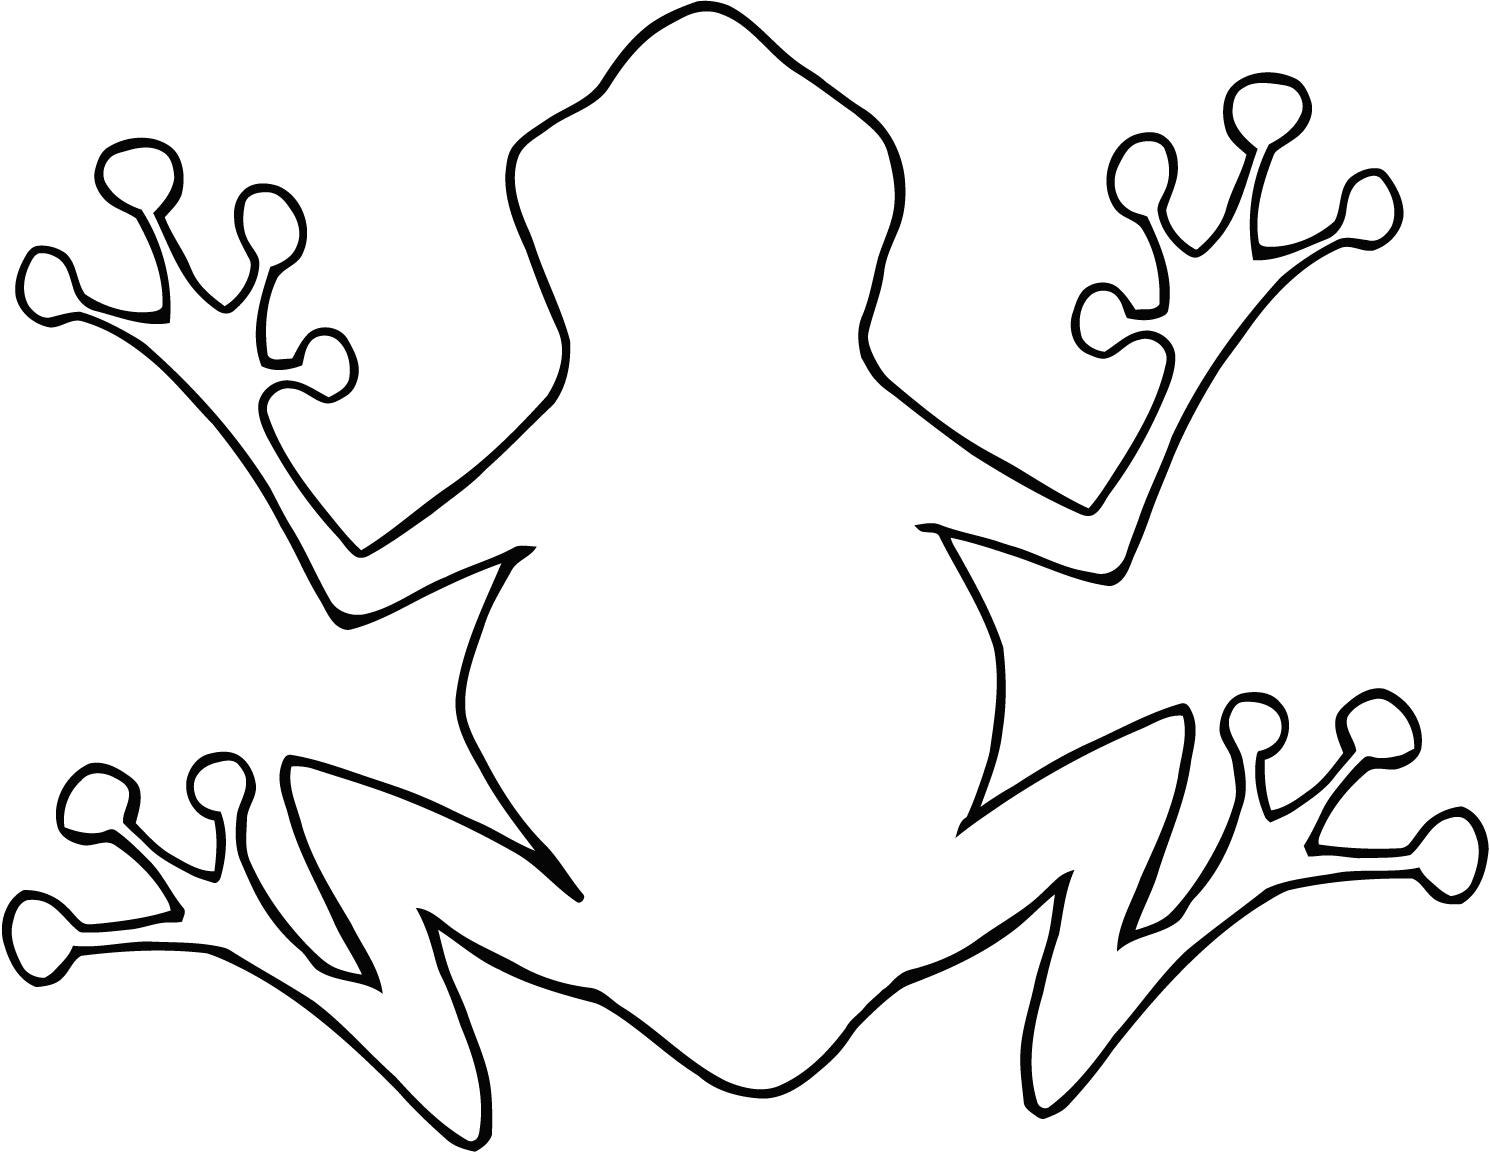 Clipart frog body. Free outline of a